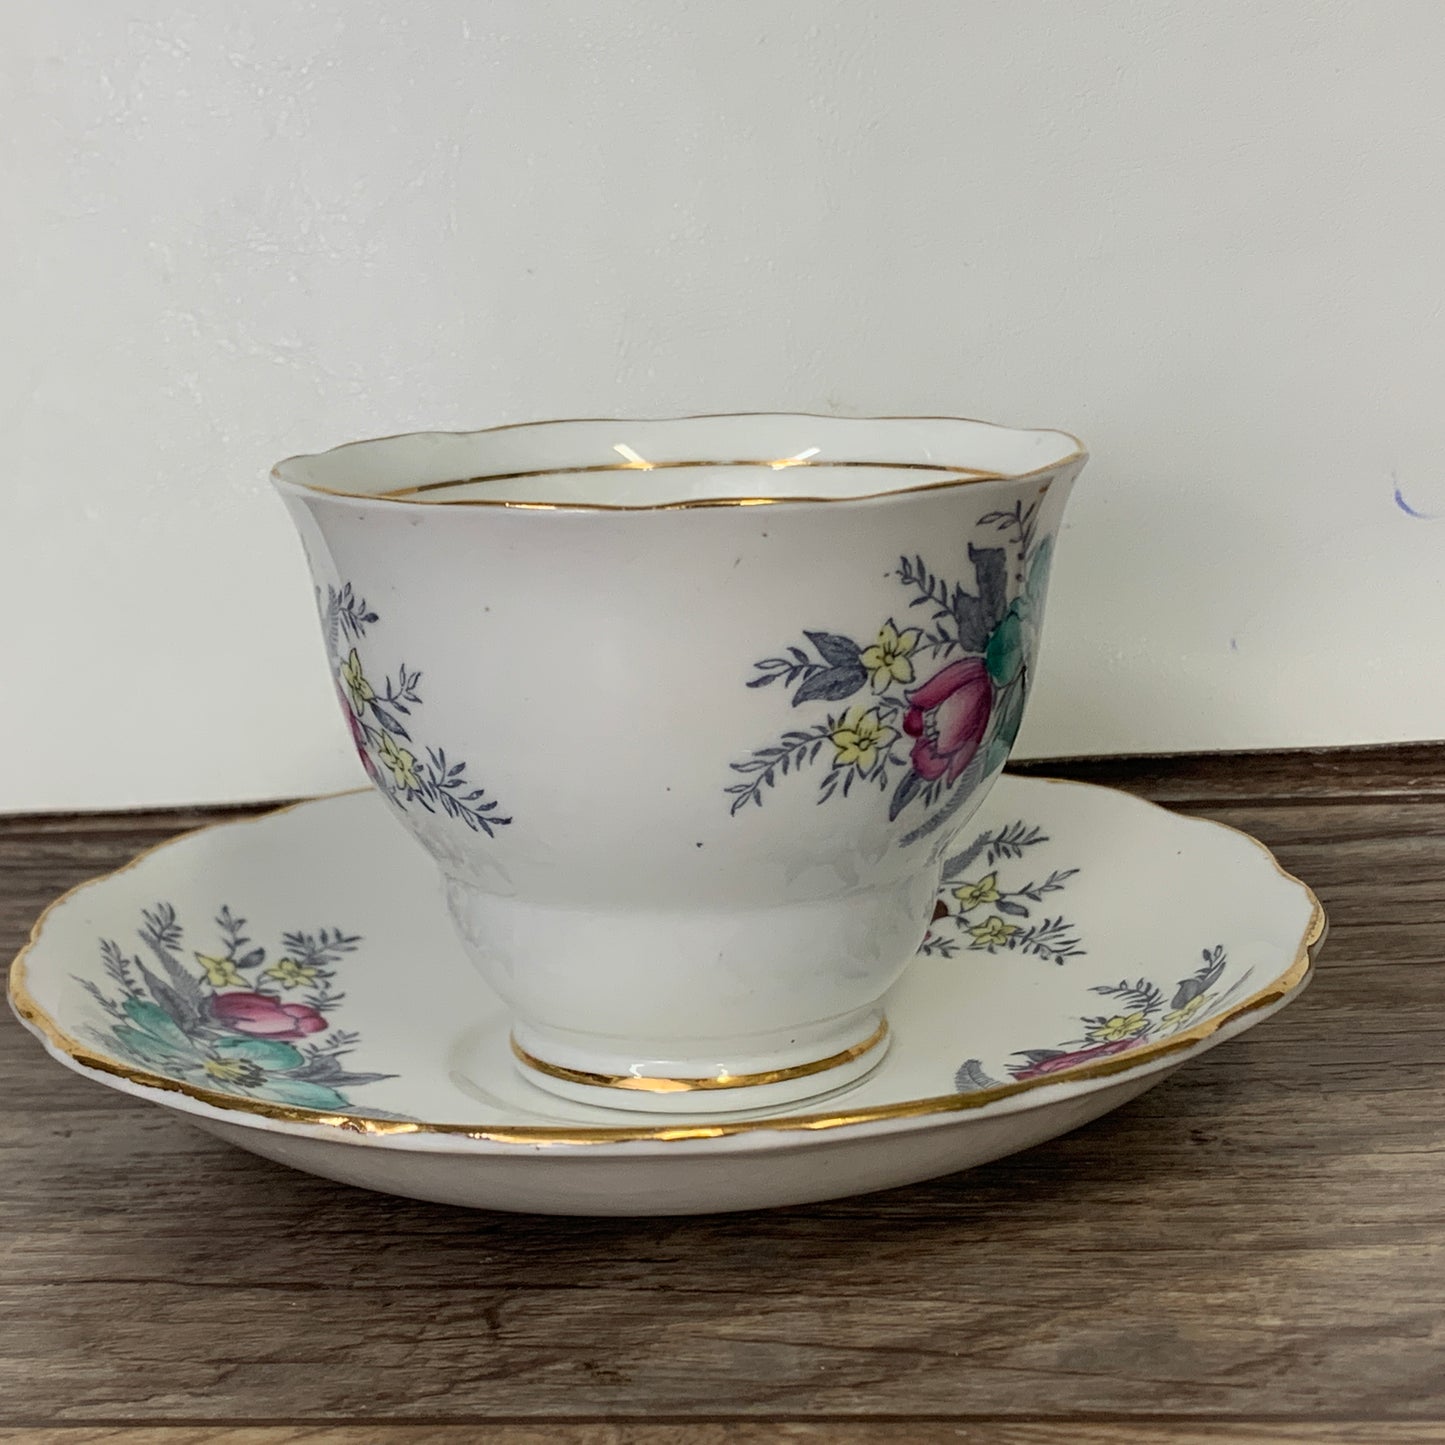 Colclough Hand Painted Teacup with Pink and Teal Flowers